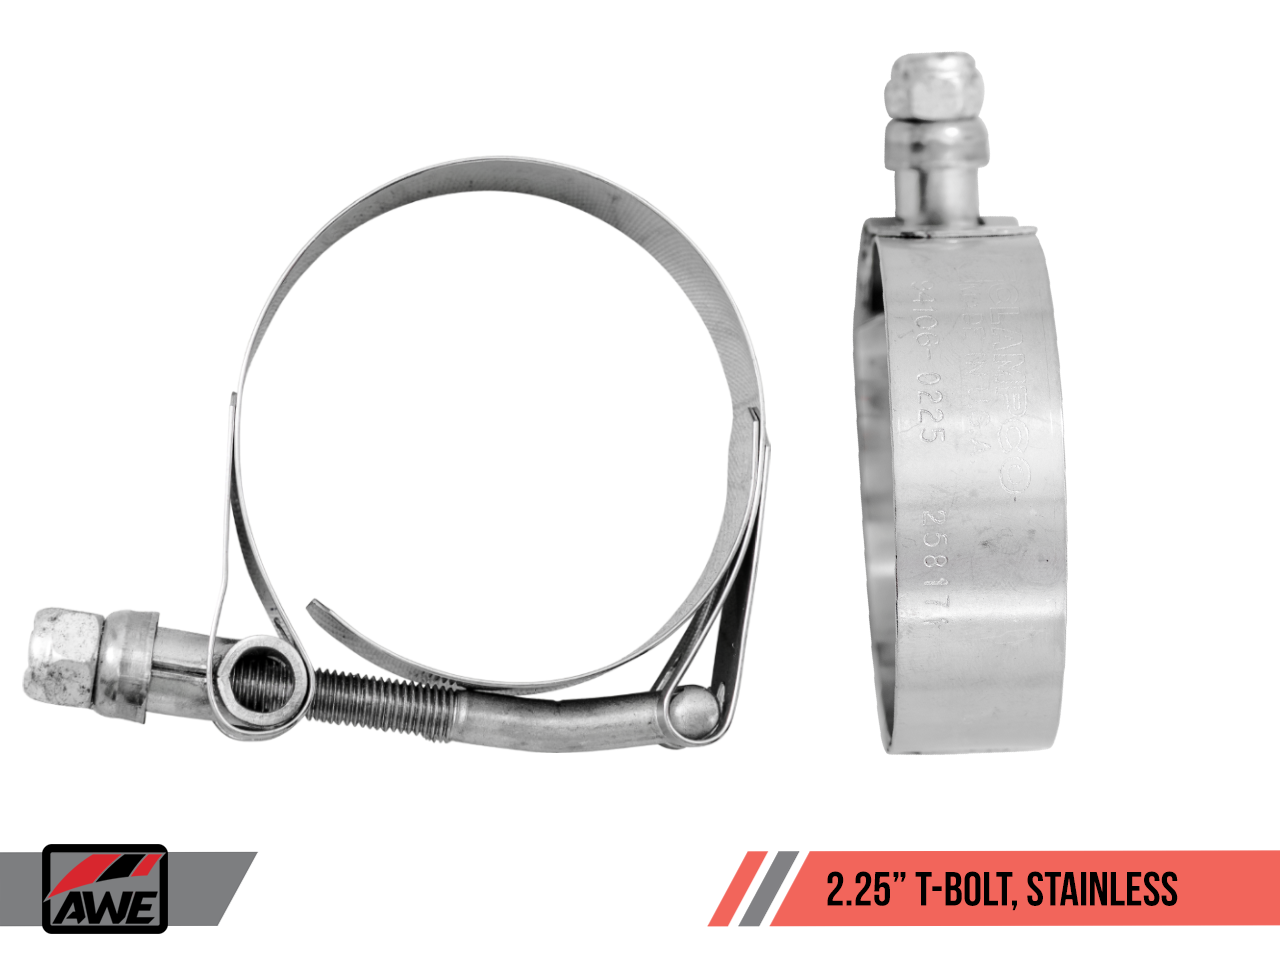 AWE 2.25" T-Bolt Clamp, Stainless